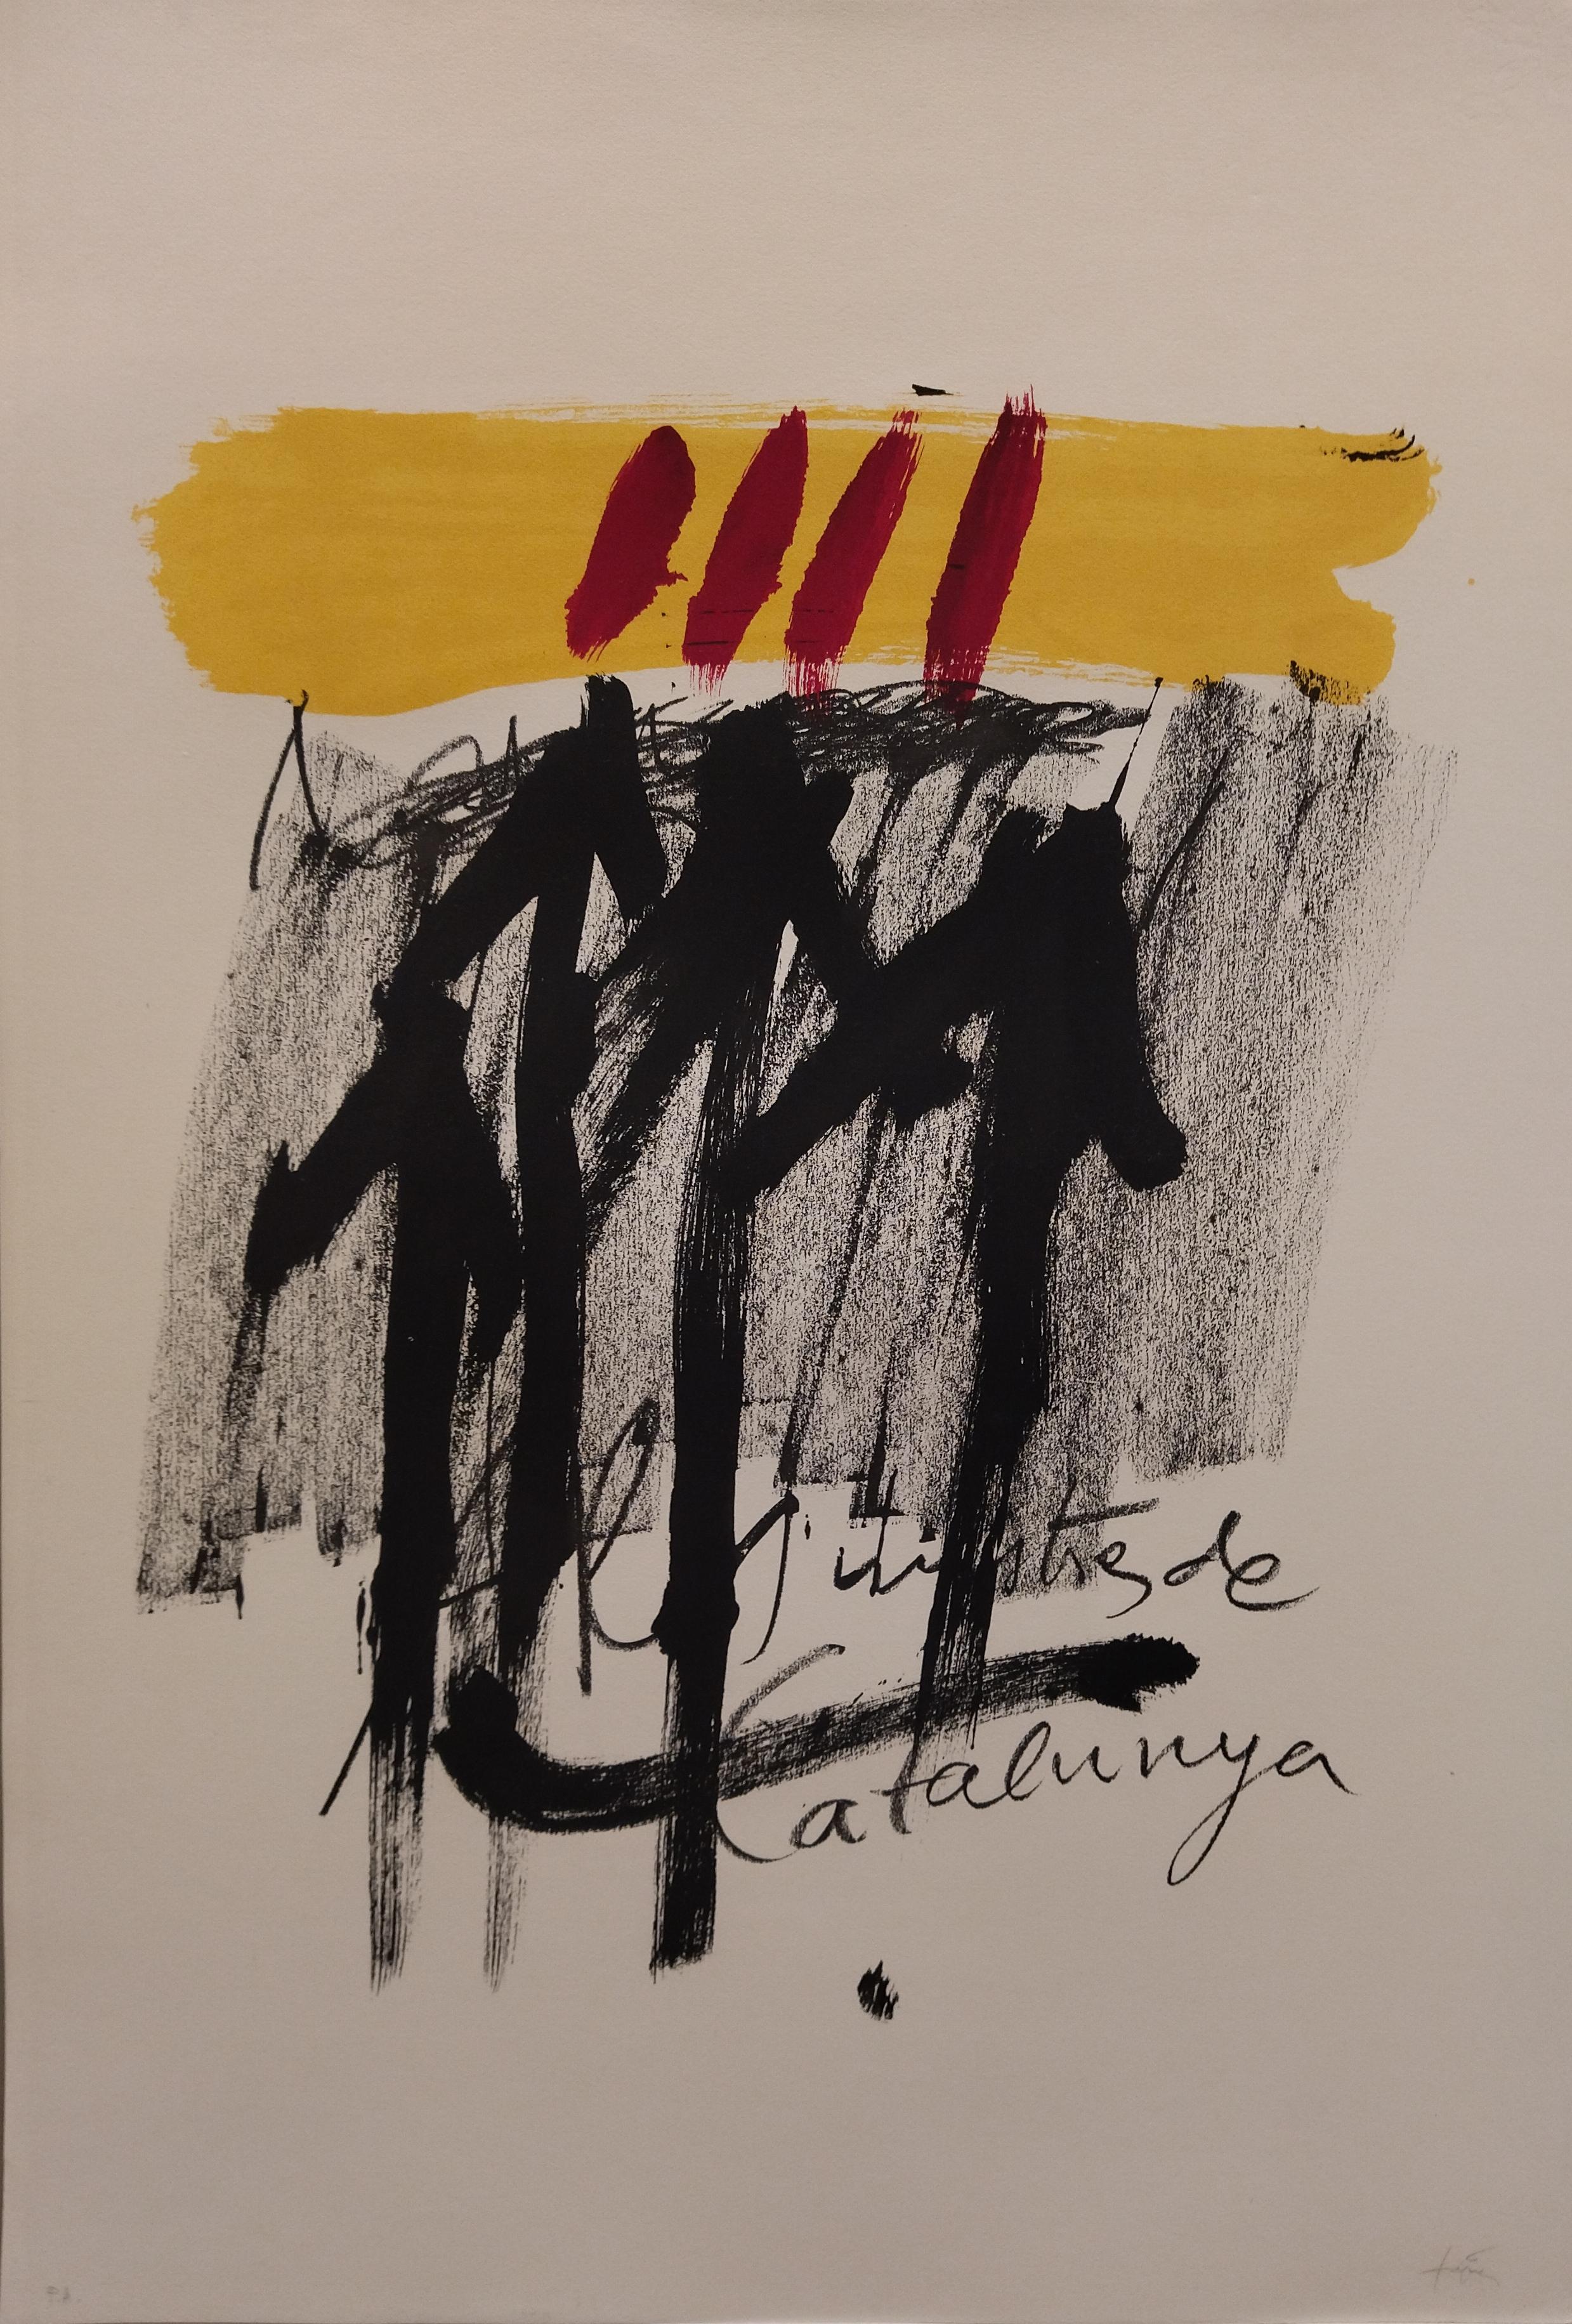  Tapies  Black  Red  Yellow  Vertical  original lithograph painting For Sale 2